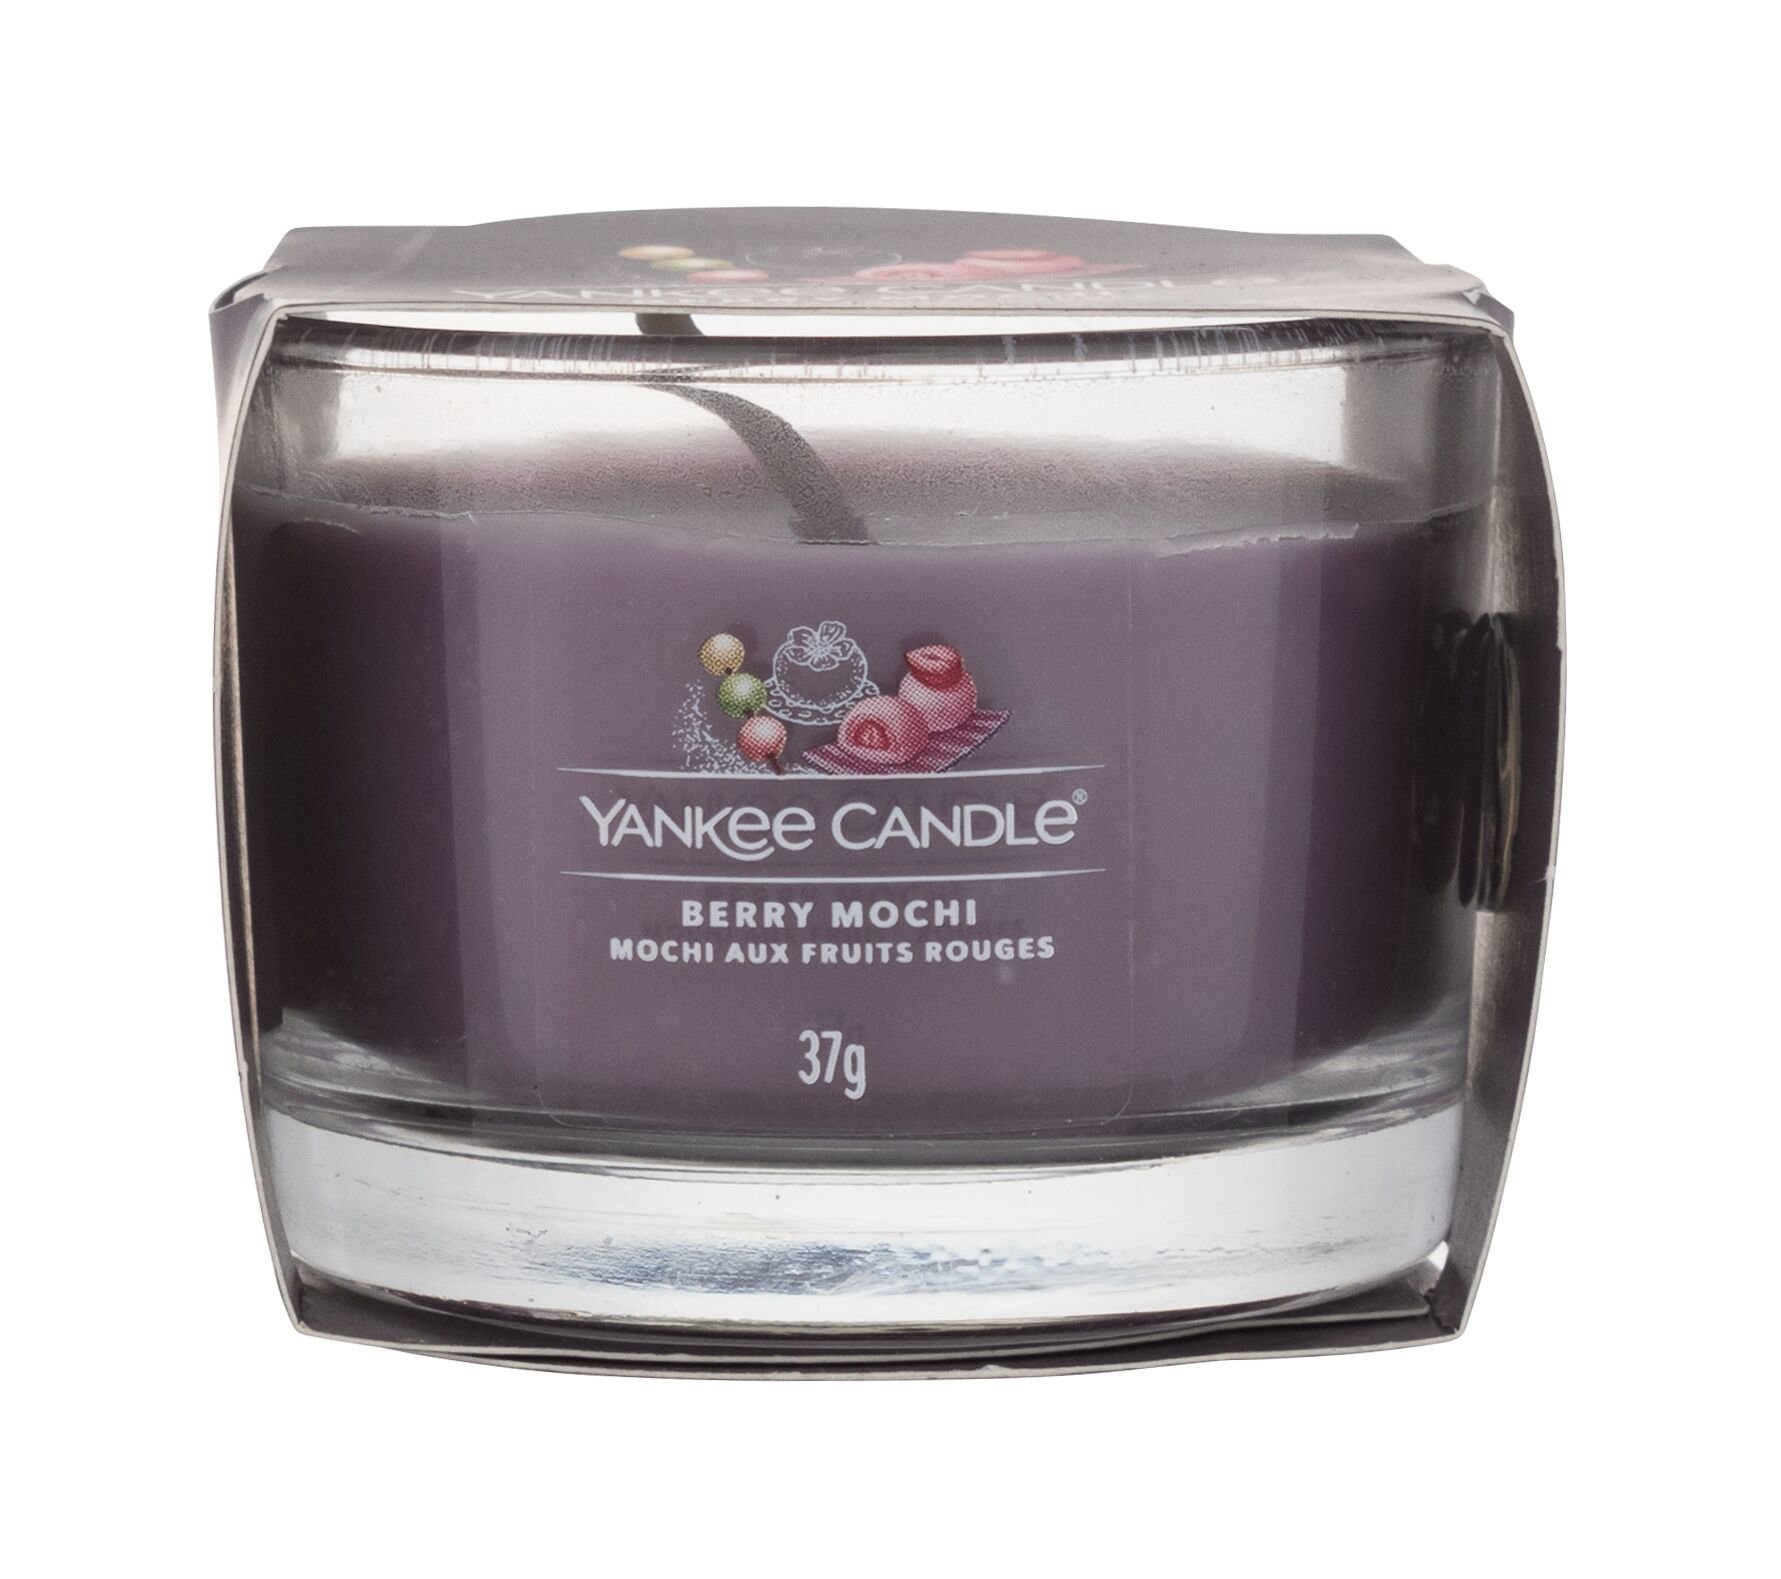 Yankee Candle Berry Mochi 37g Kvepalai Unisex Scented Candle